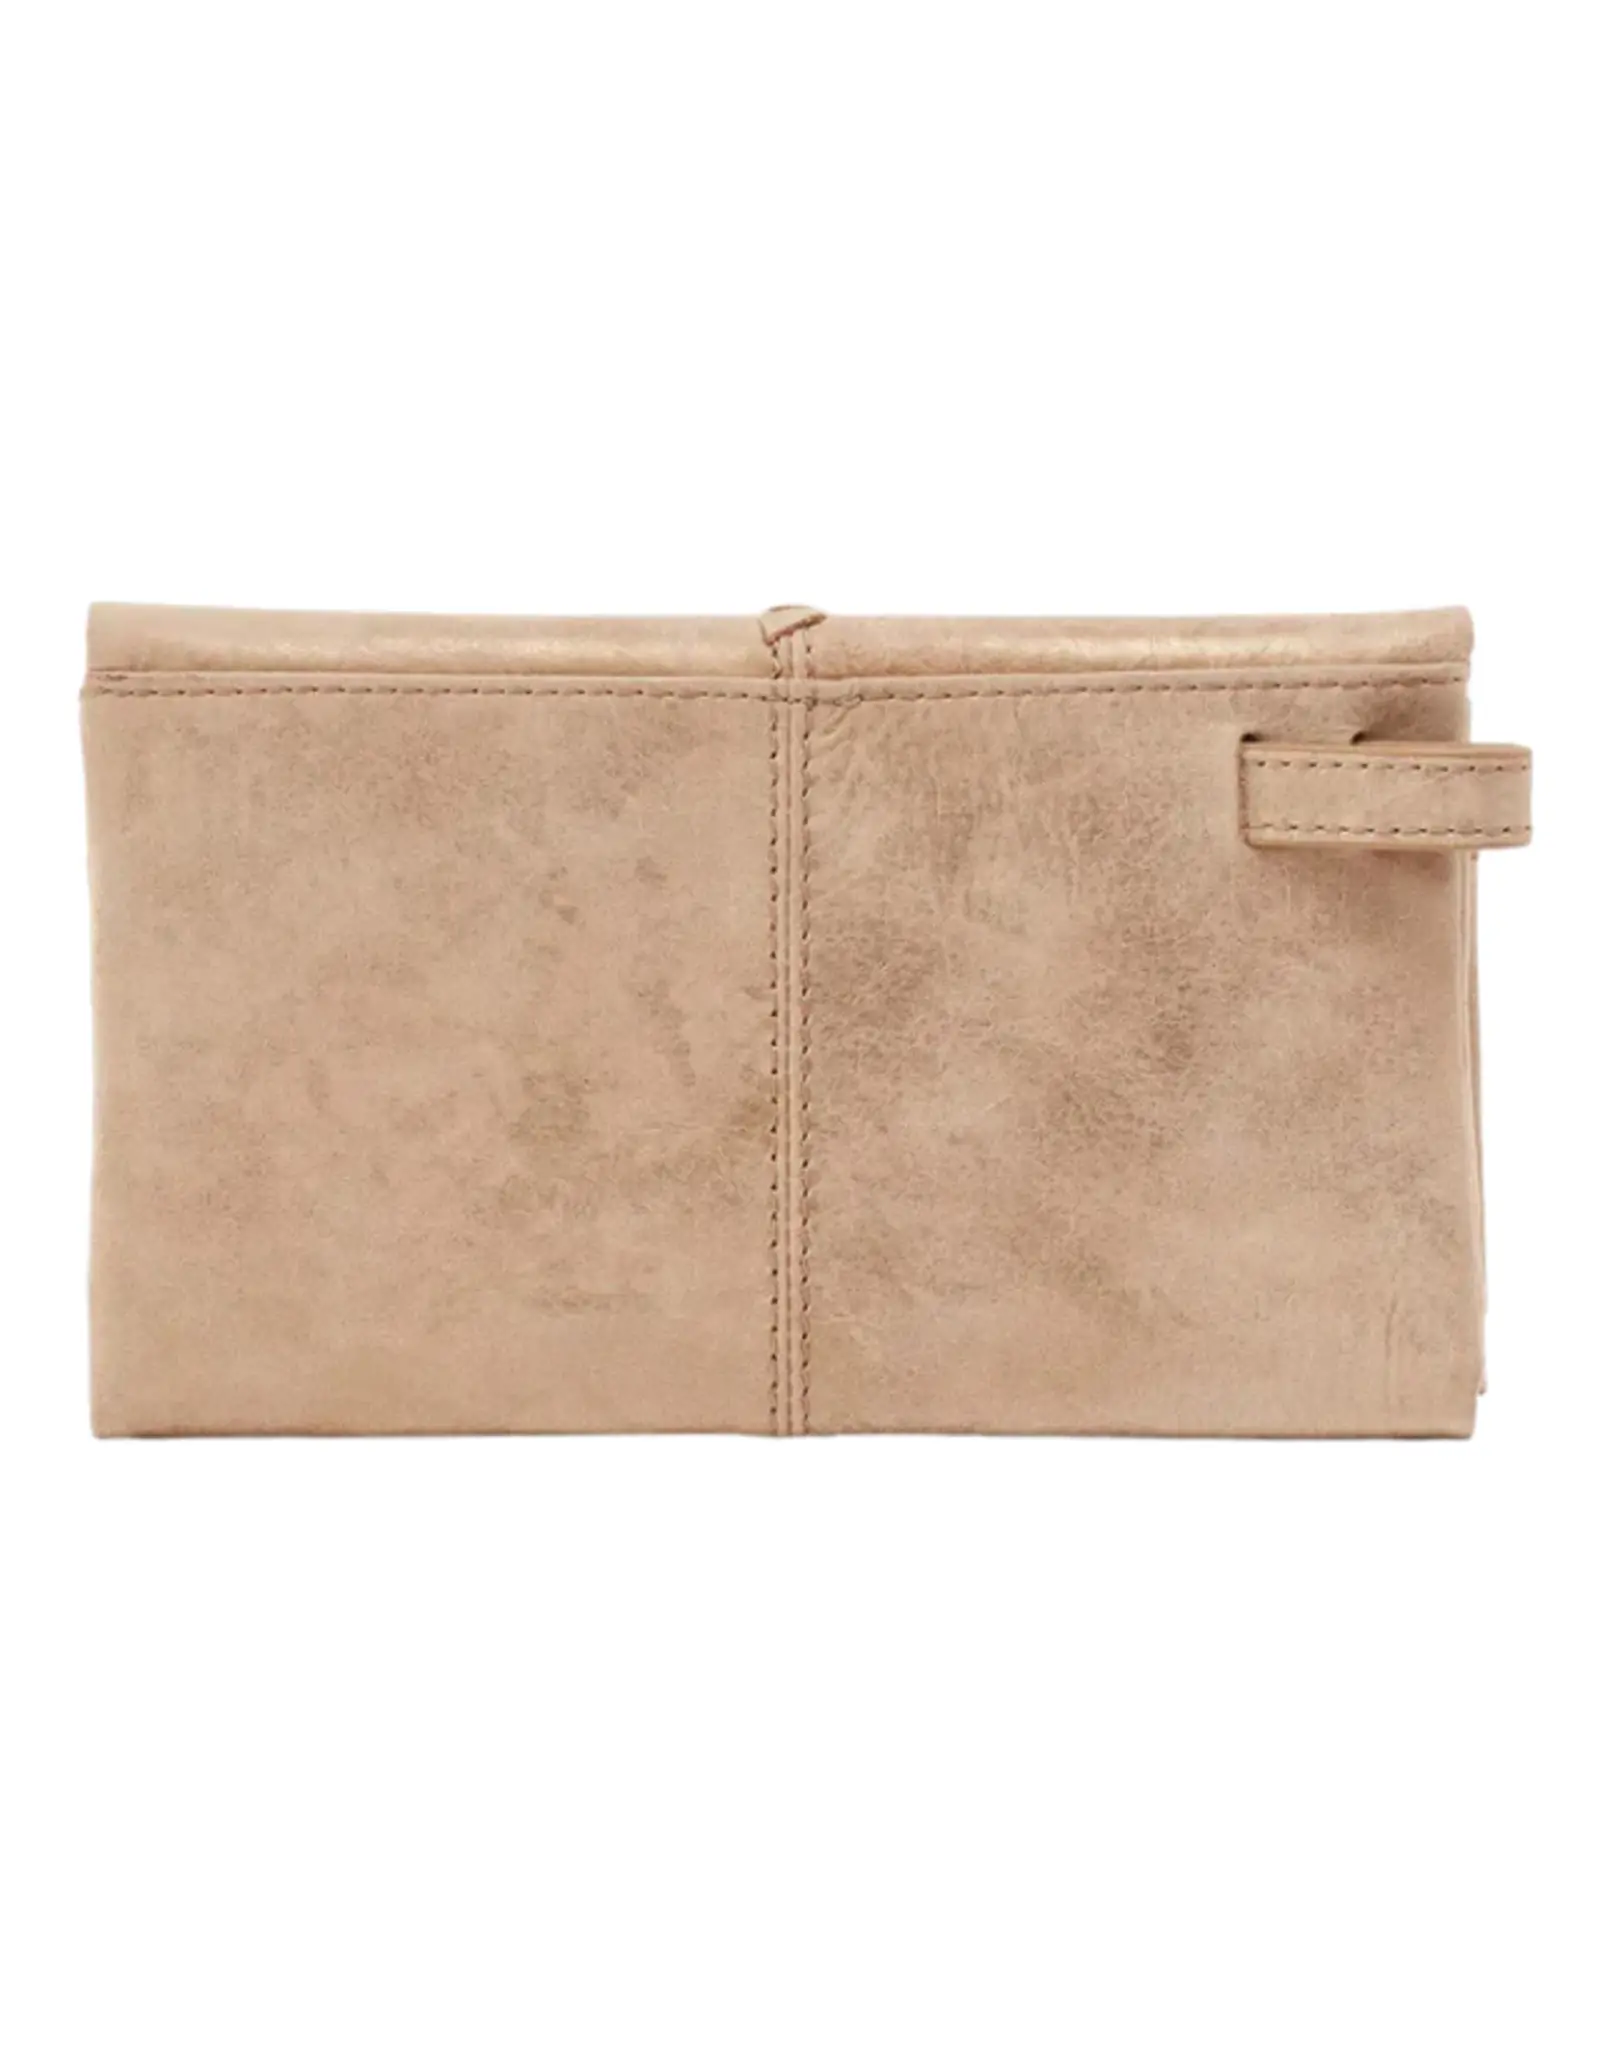 HOBO Keen Continental Wallet- Gold Cashmere